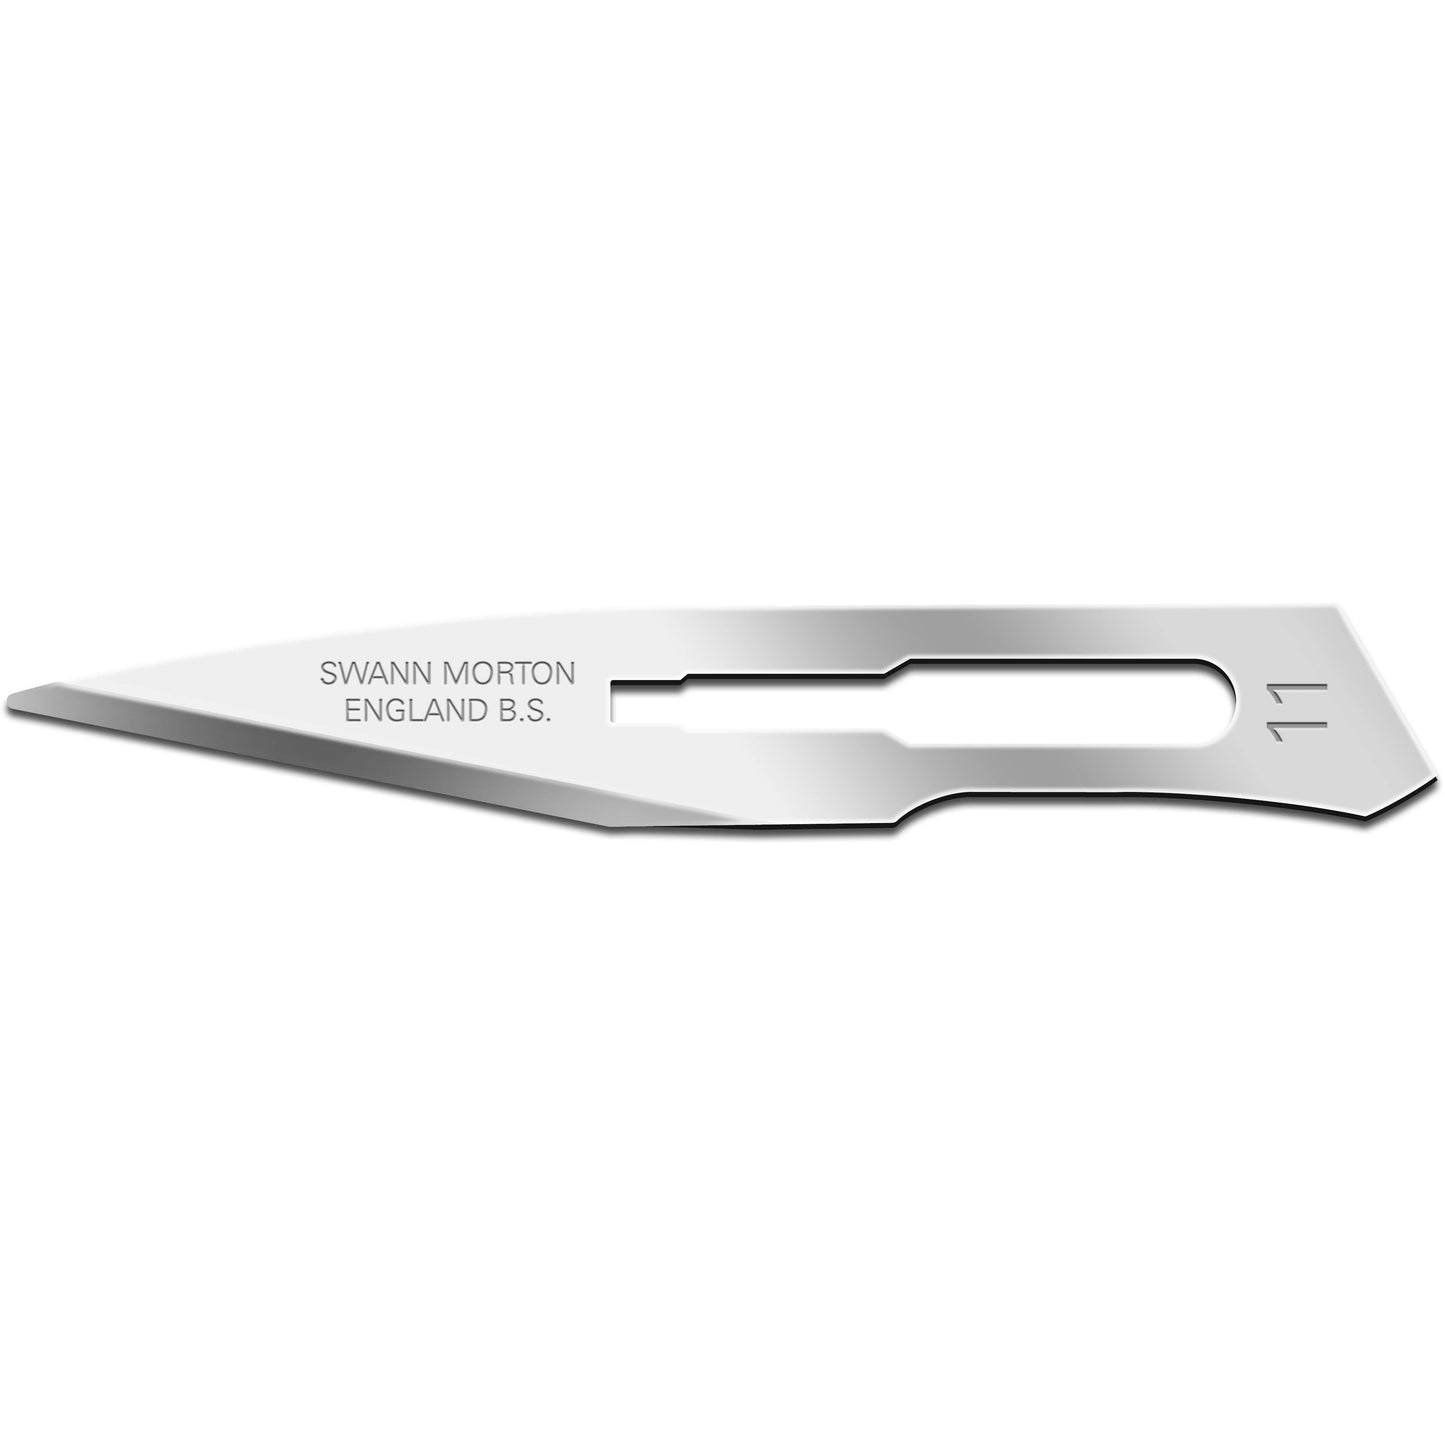 Surgical Scalpel Blade 11 - Carbon Steel - Sterile (Pack of 100)